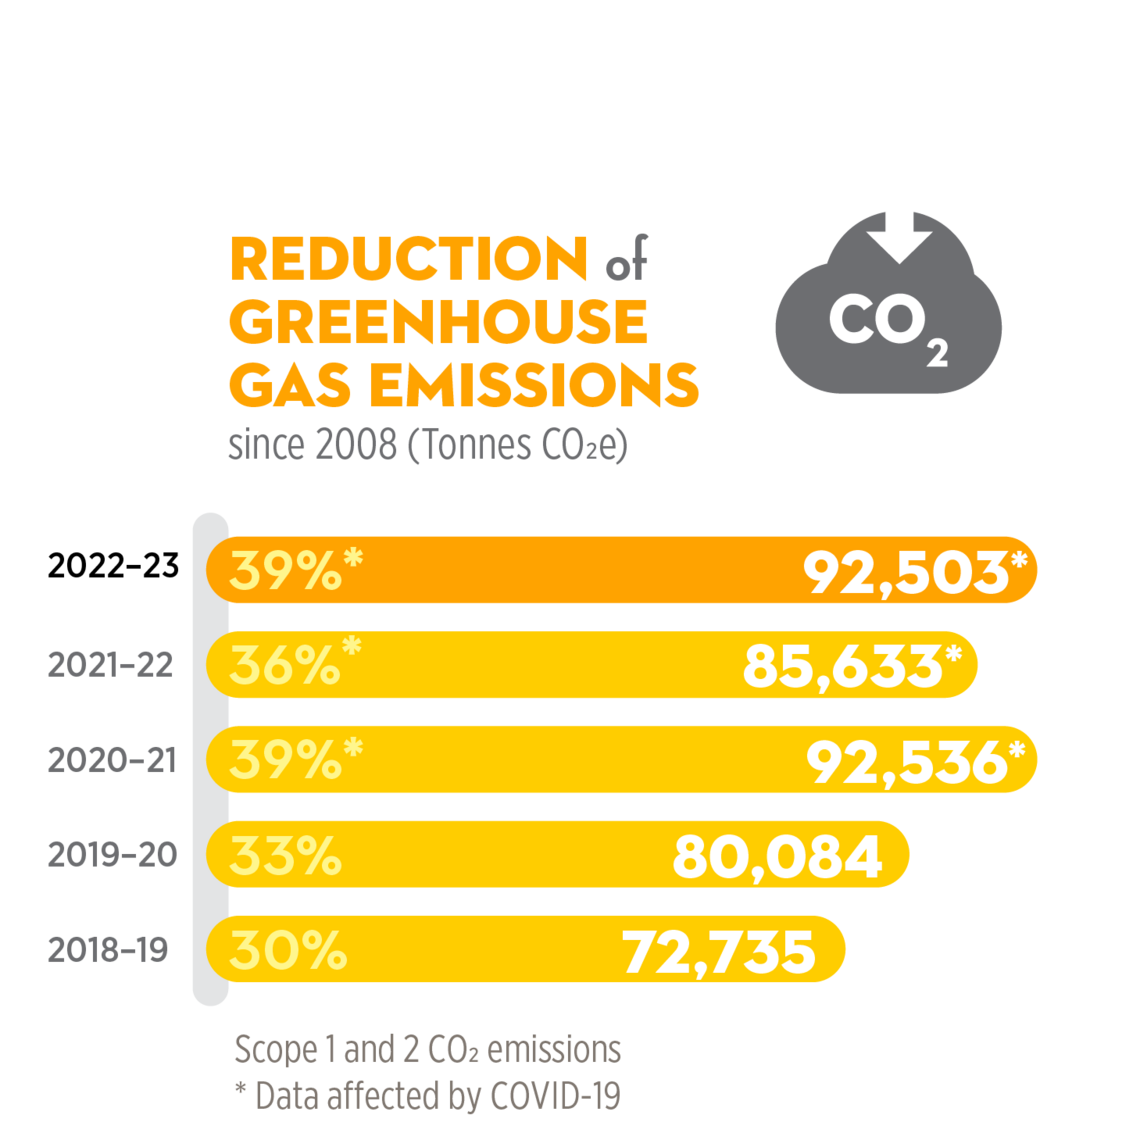 In 2022-23 there was a 39% reduction in greenhouse gas emissions